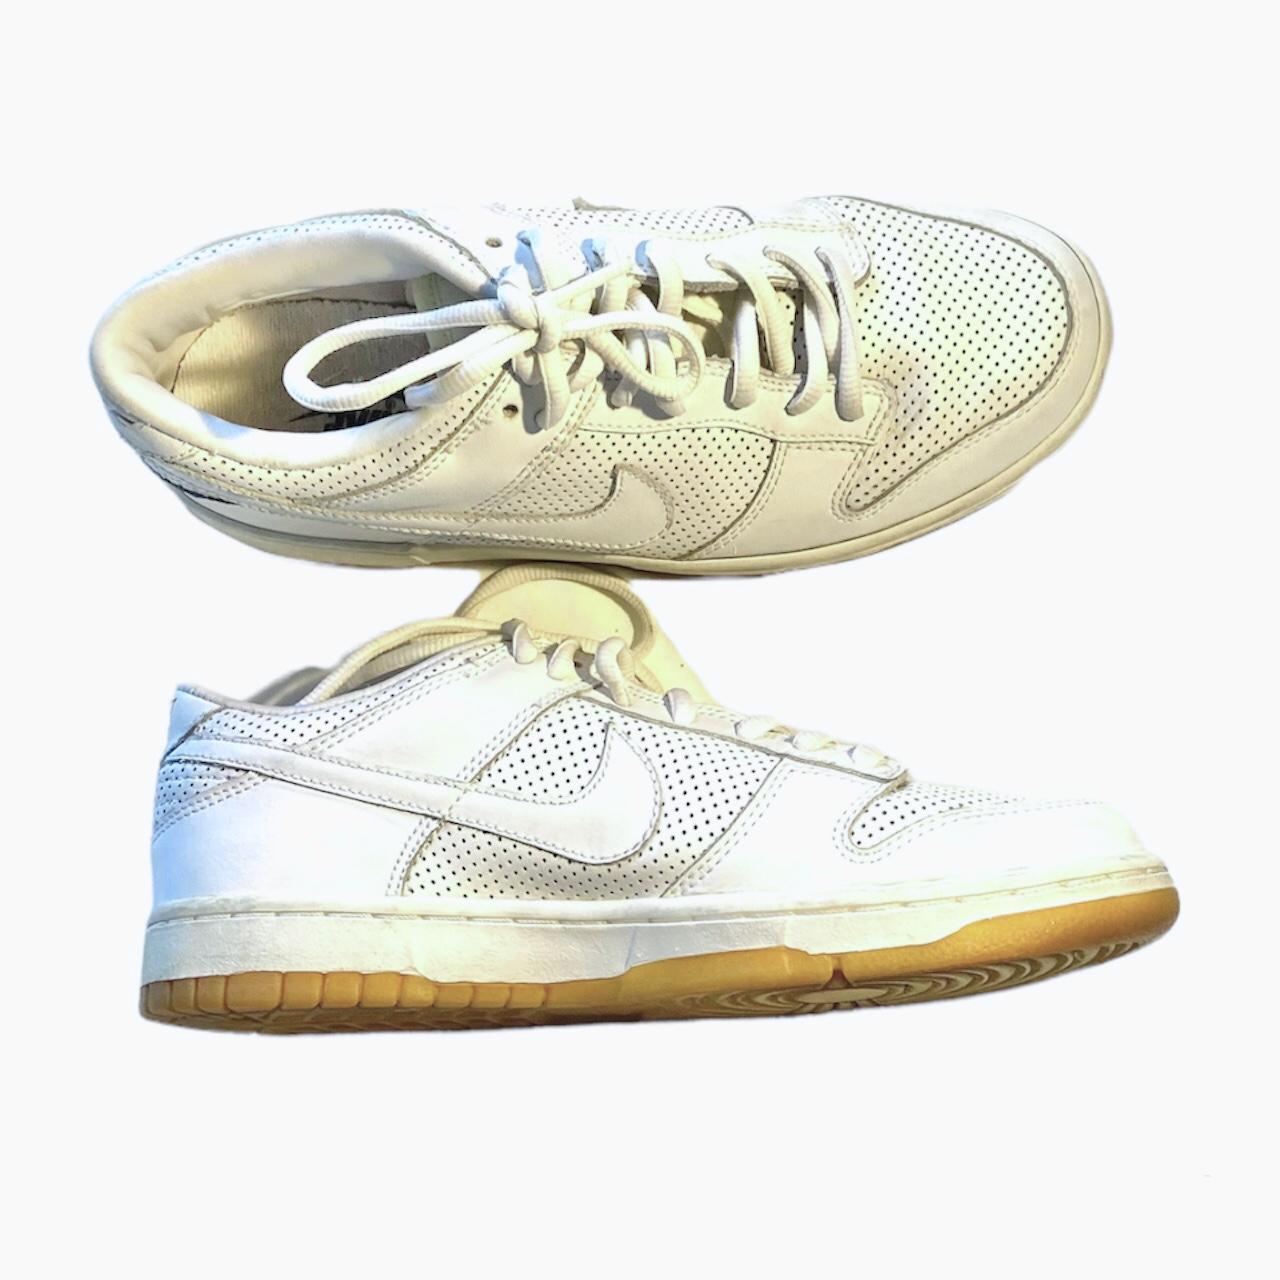 EXTREMELY RARE NIKE DUNK LOW DRUM ISLAND PACK from... - Depop